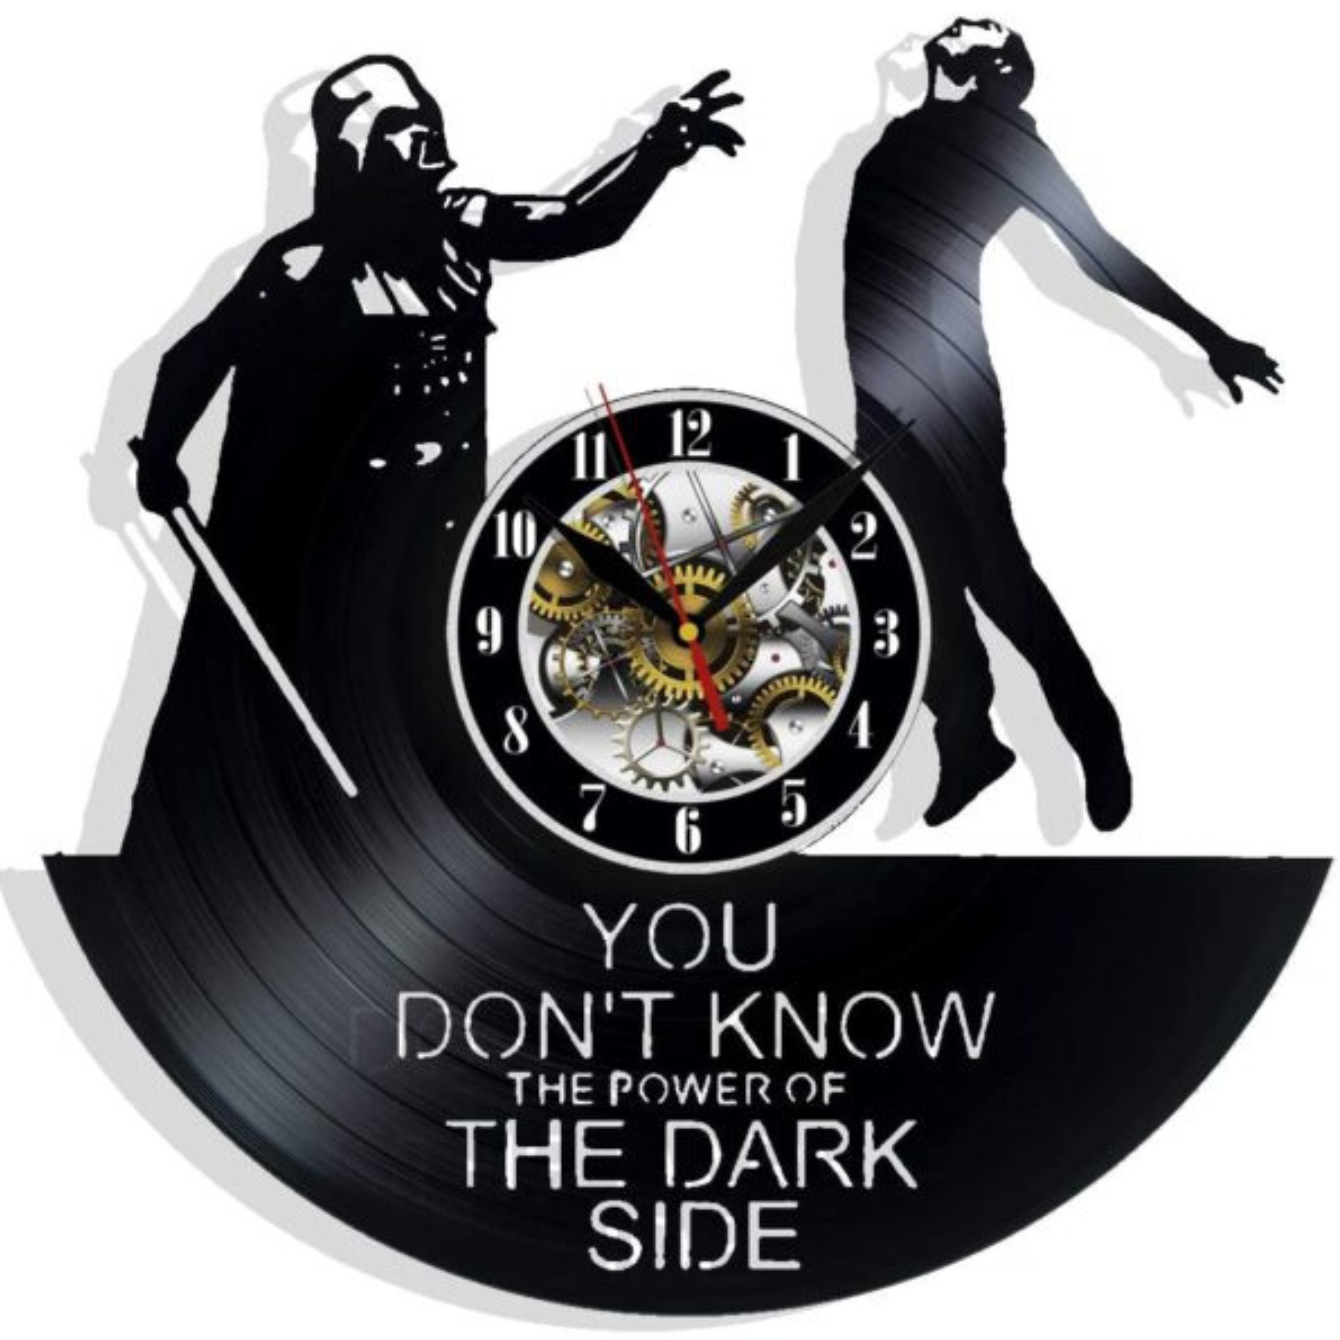 Star Wars (You Don't Know the Power of the Dark Side) Wall Clock